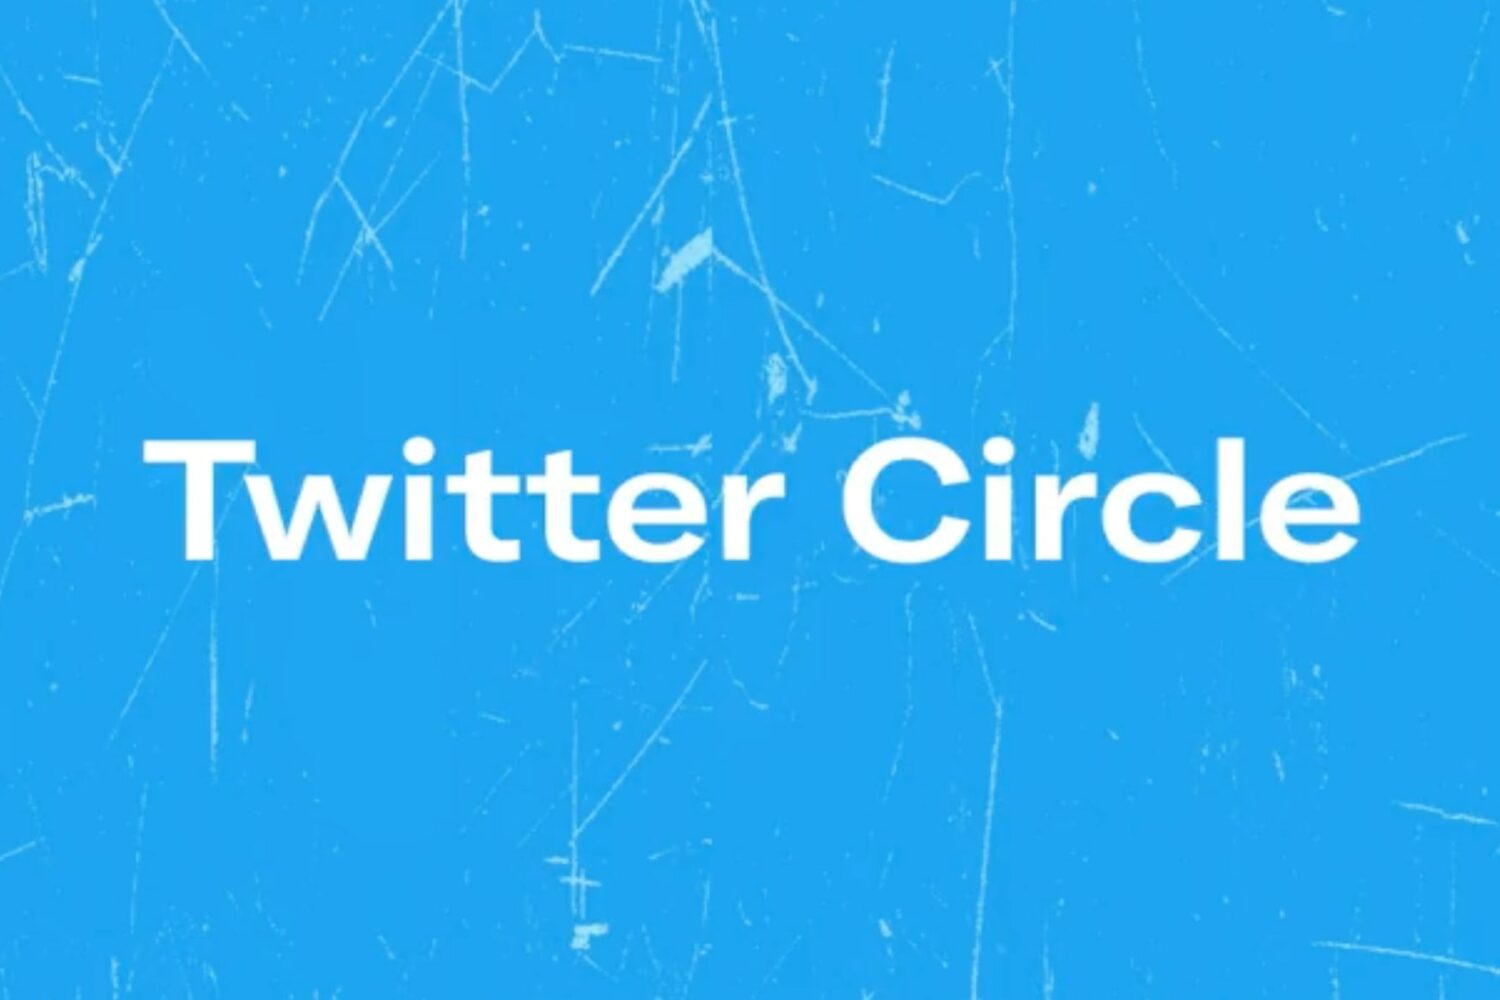 Promotional image displaying the words "Twitter Circle" in white font, set against a light blue background